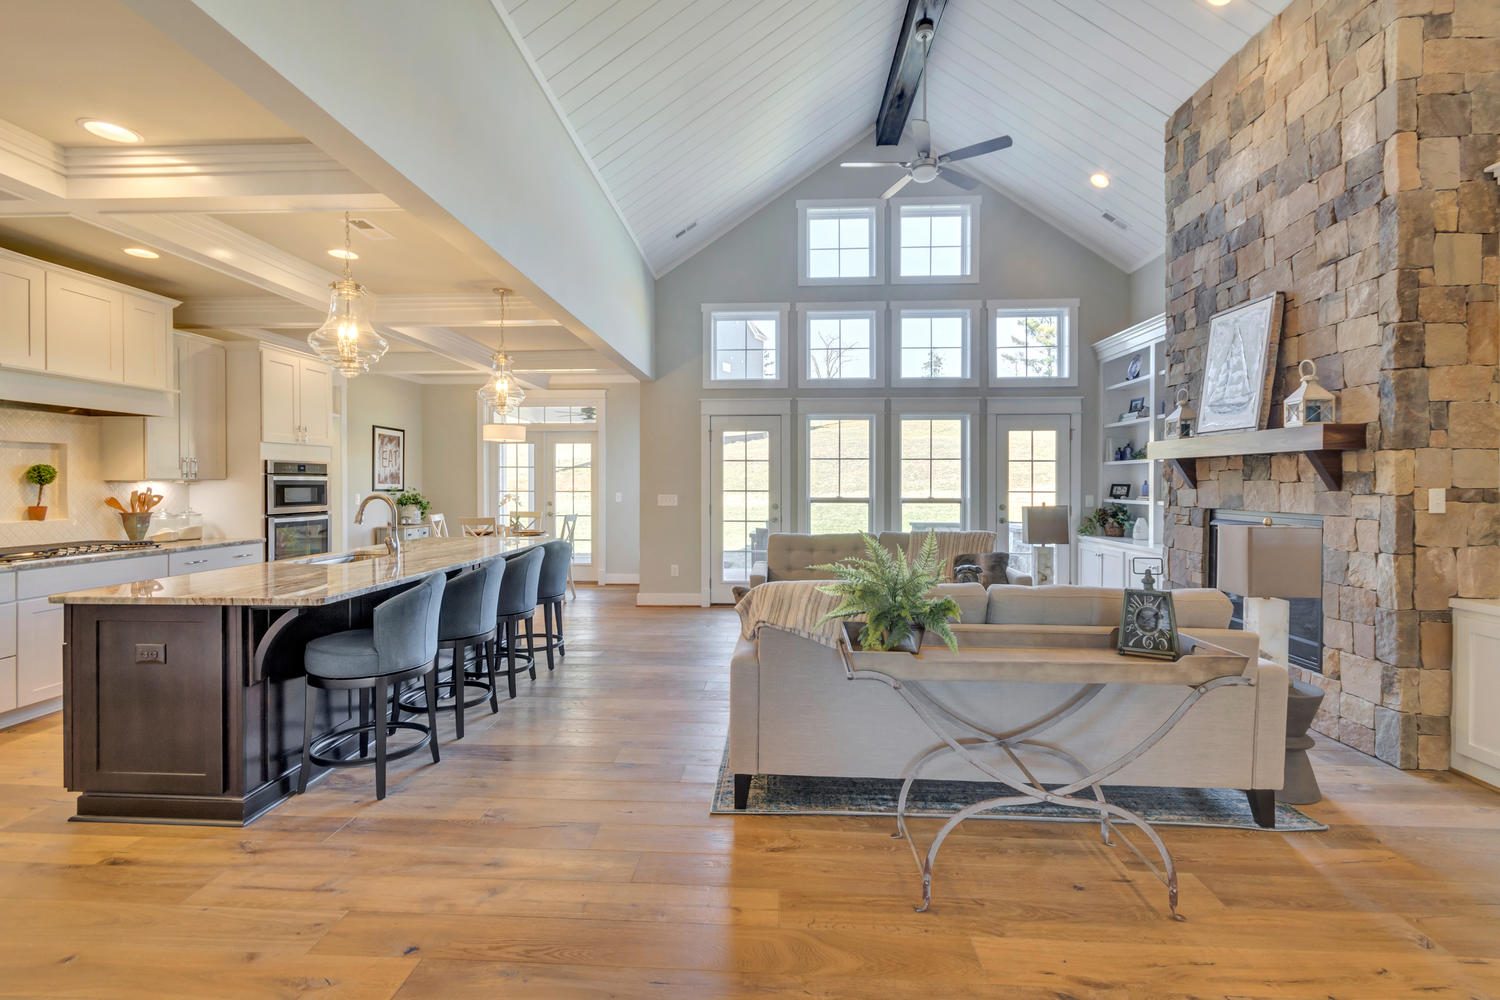 An open concept kitchen and great room with floor to ceiling windows. A comfortable living space centered around a stone fireplace is on the right, with a vaulted ceiling and ceiling fan above it. The kitchen is to the left with an island with upholstered high chairs.